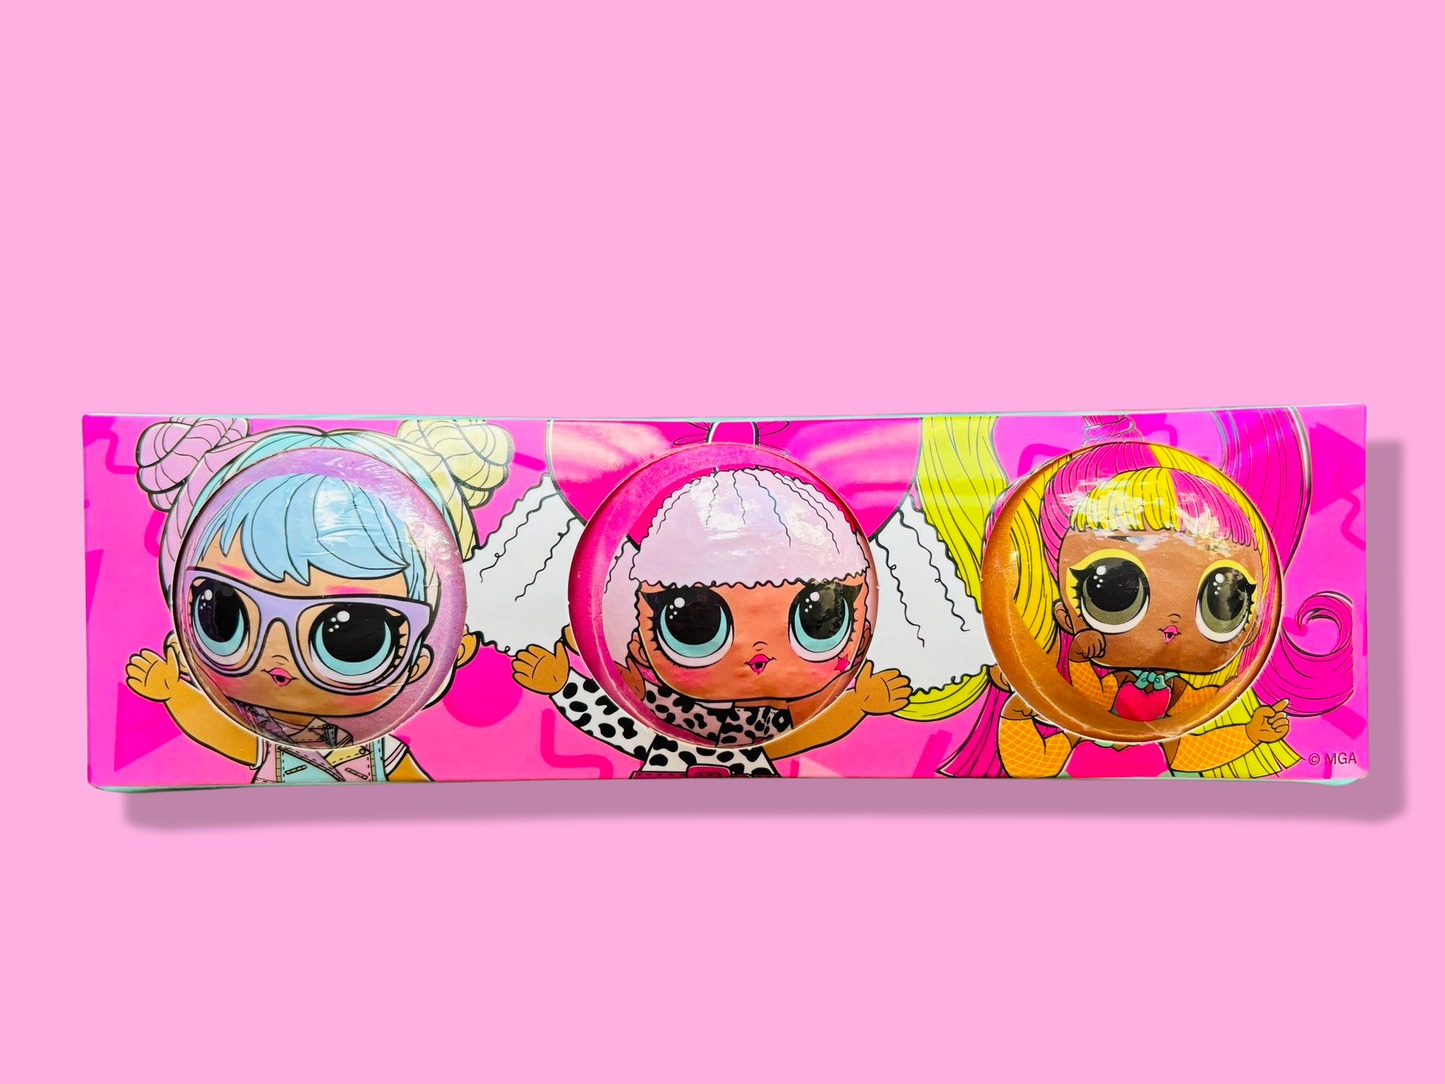 Three cartoon characters with large eyes and colorful costumes are displayed on a pink rectangular package, making it the perfect gift for little girls who love The Soap Gal x LOL Dolls Bath Bombs 3 Pack. Enjoy a fragrant bath experience with these delightful surprises inside!